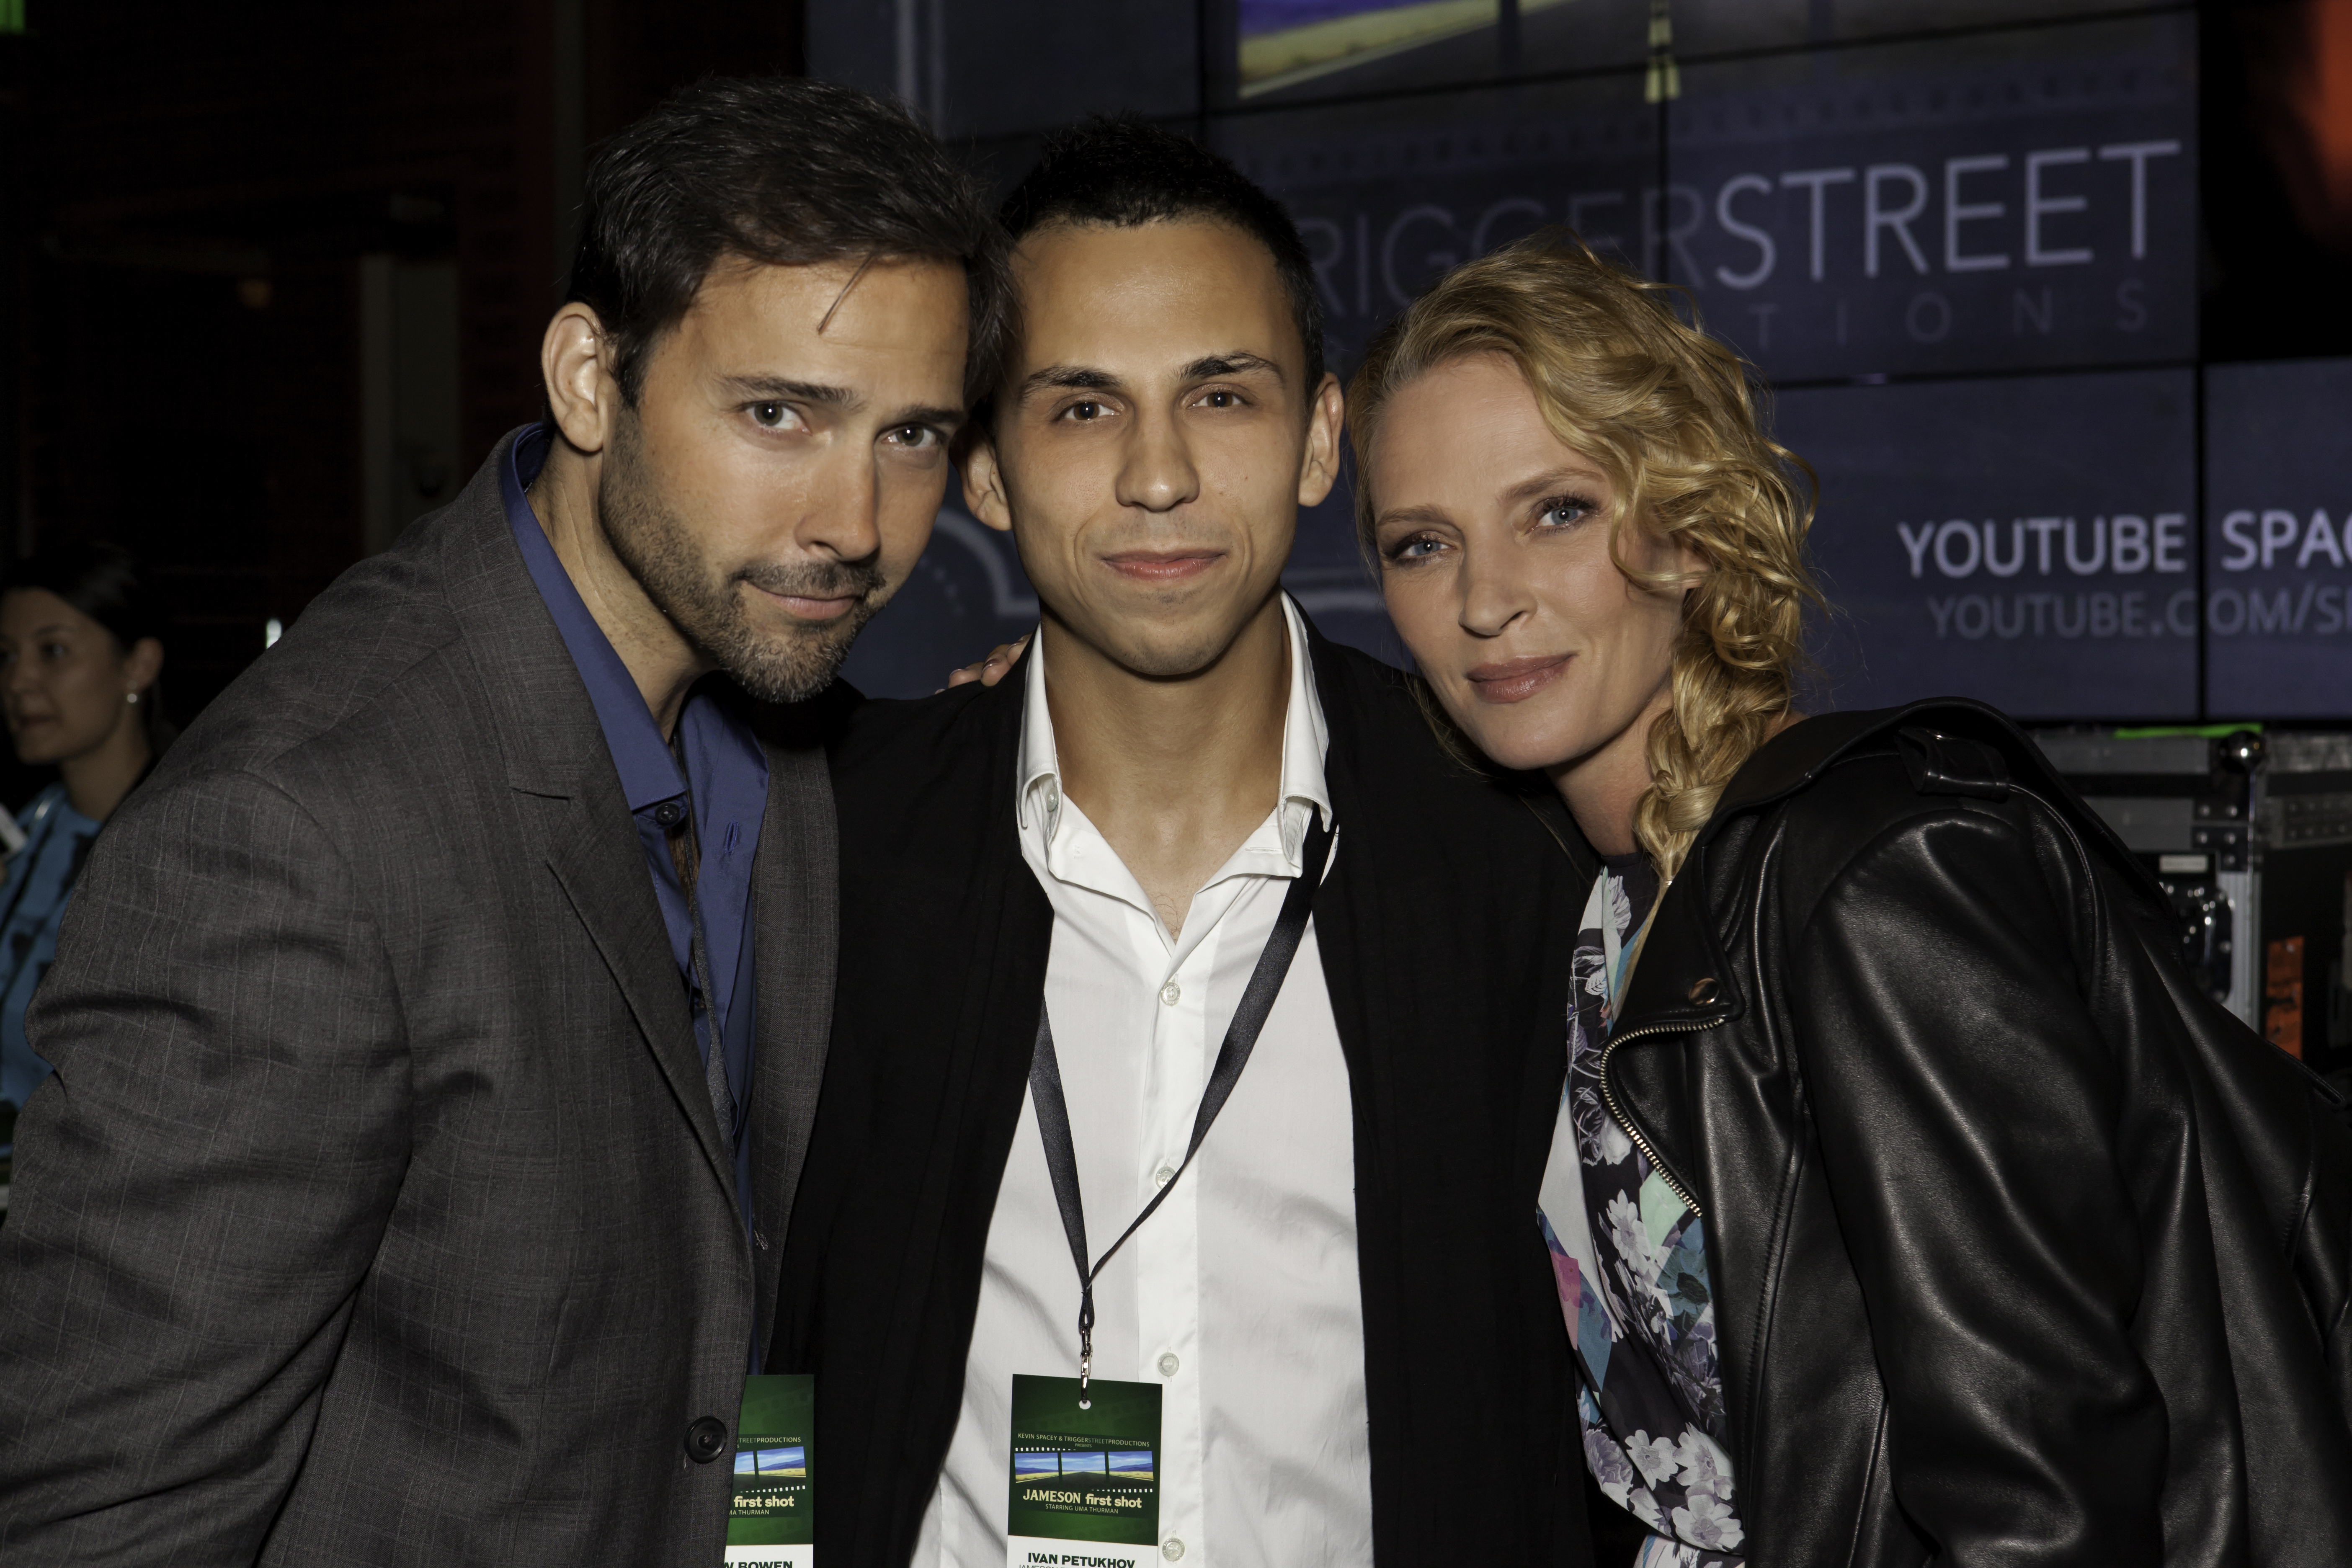 Uma Thurman and Andrew Bowen flank Ivan Petukhov, the director of the Jameson First Shot Winning Film they star in 